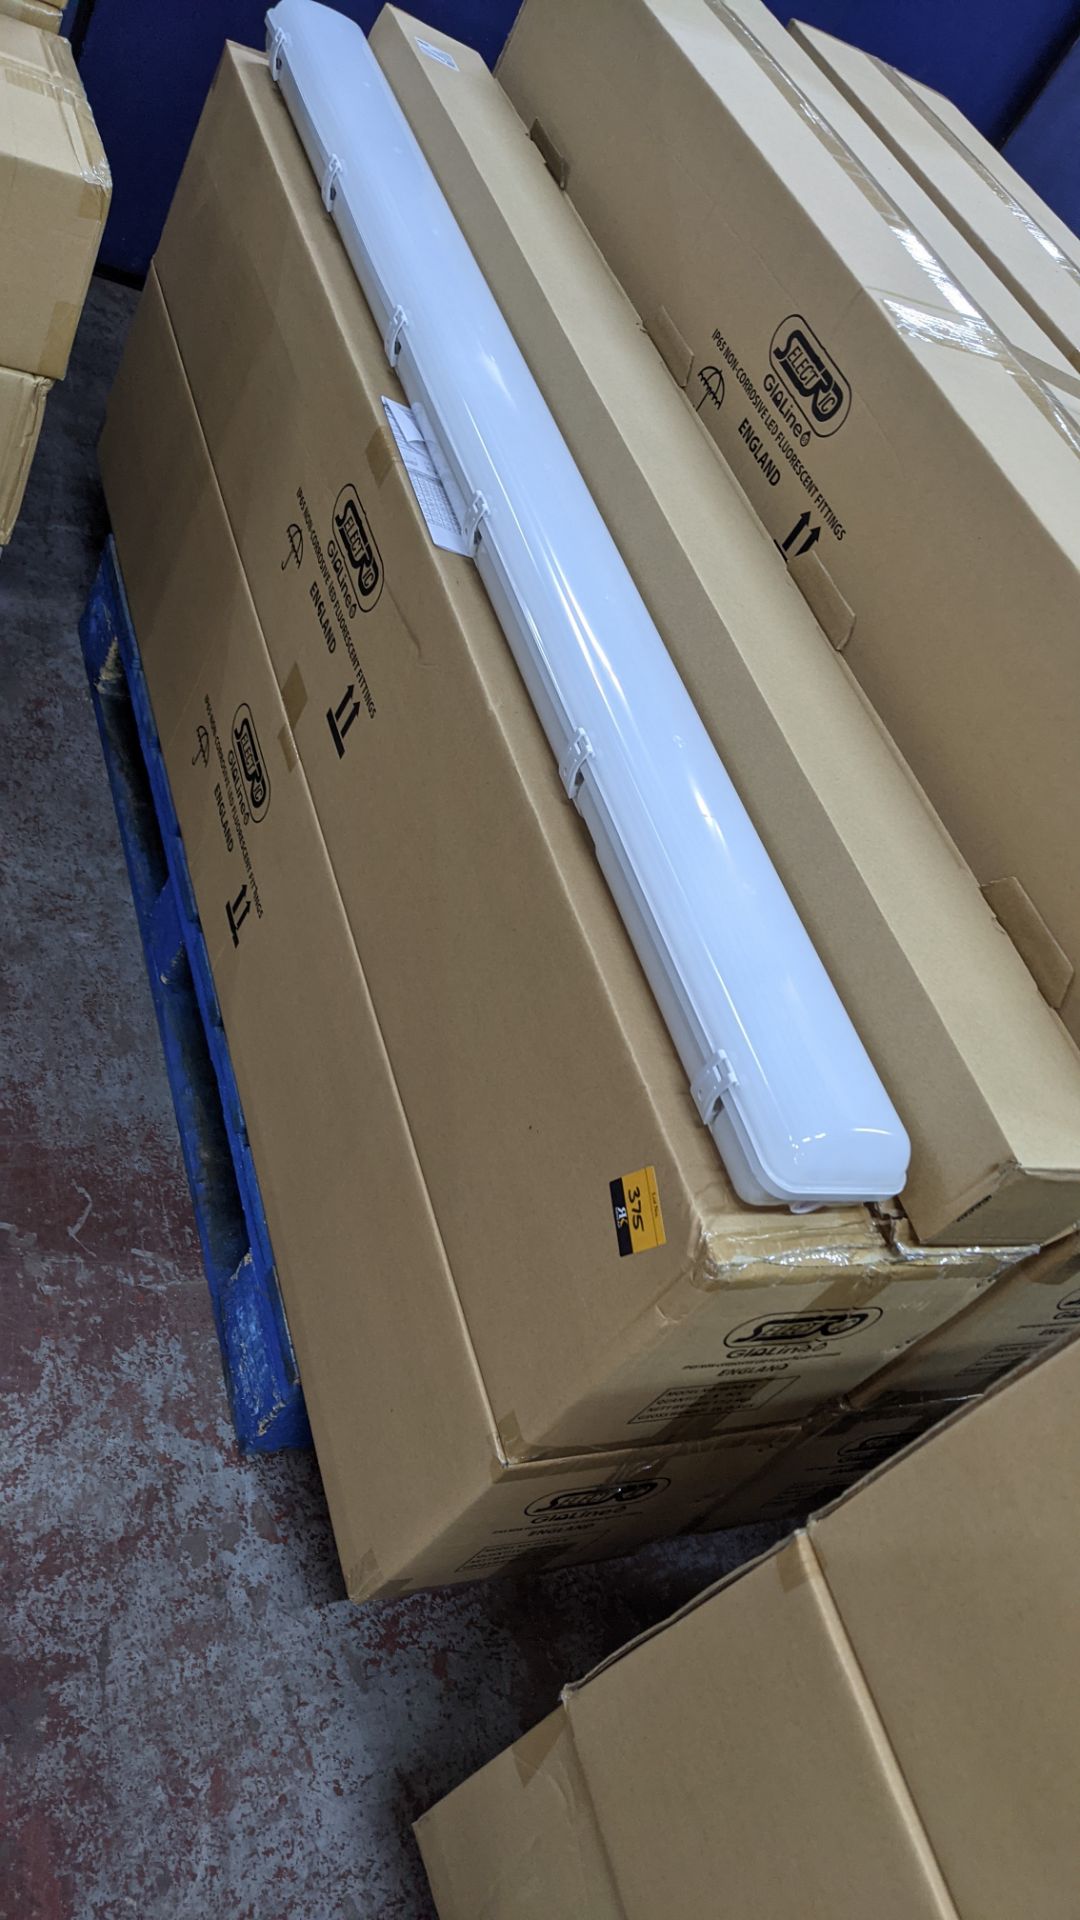 12 off IP65 non-corrosive LED fluorescent light fittings. Model GLO65-8, 5', twin LED 60W (with eme